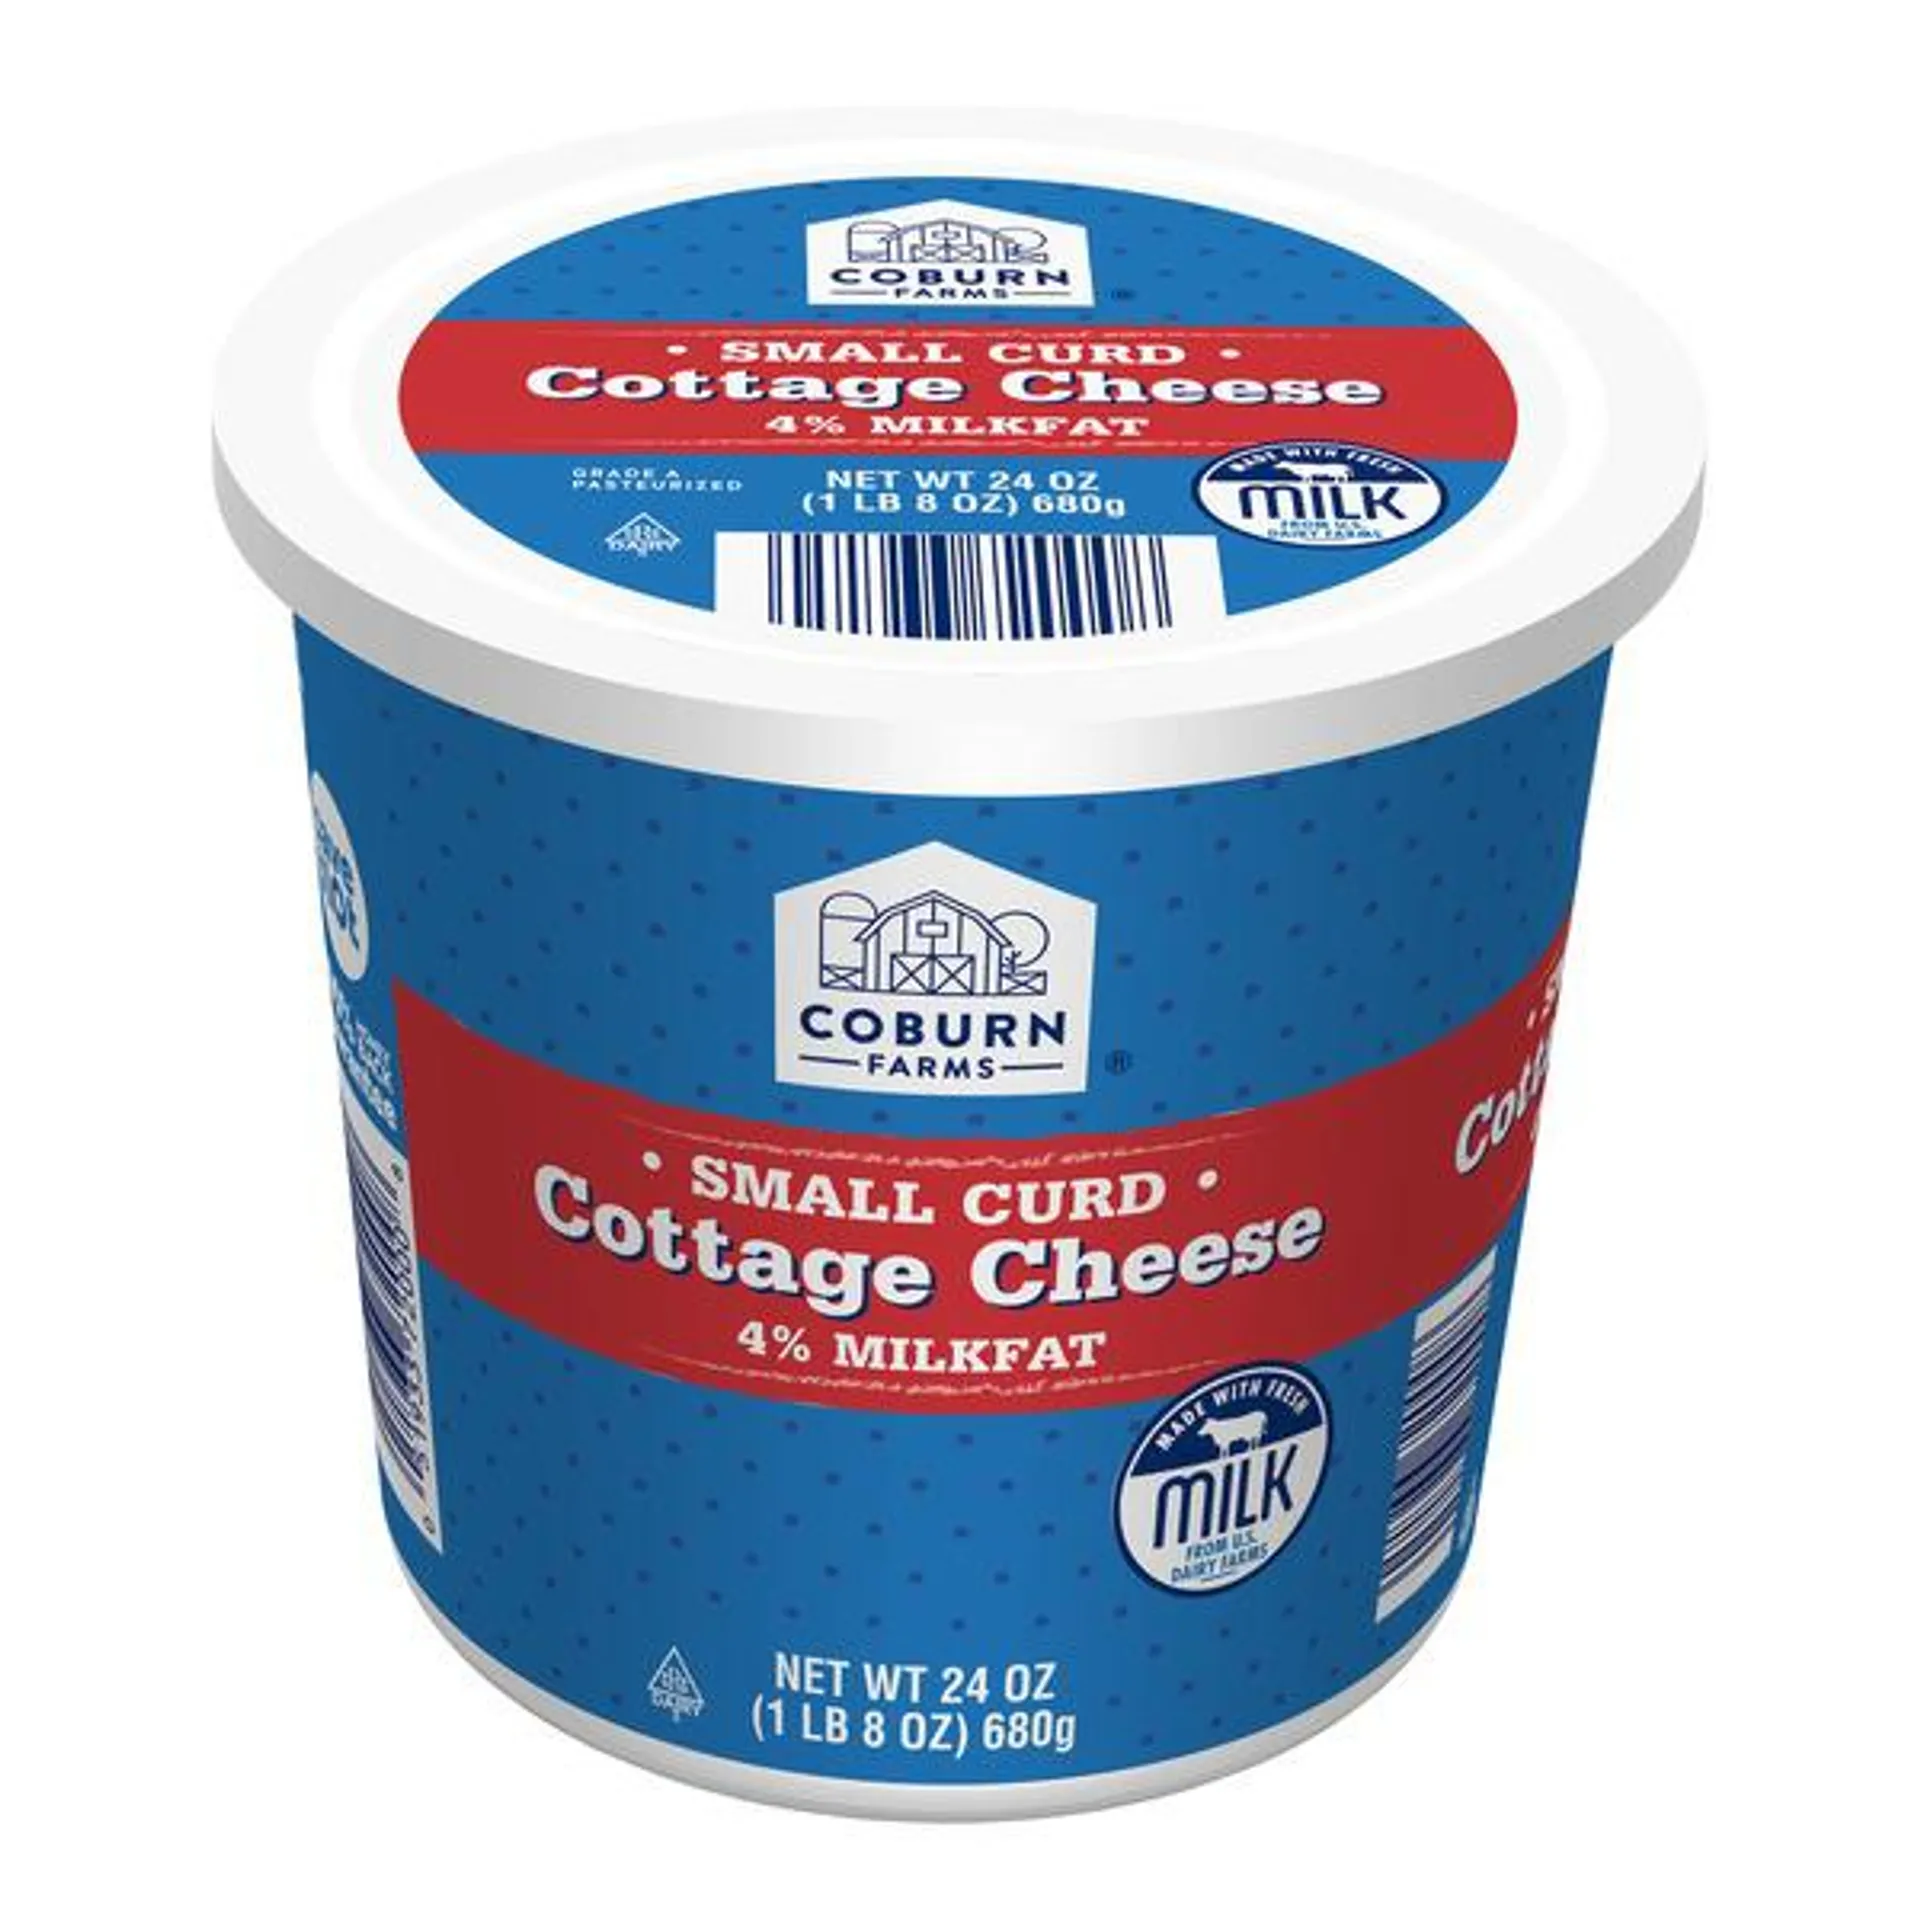 Coburn Farms Small Curd Cottage Cheese